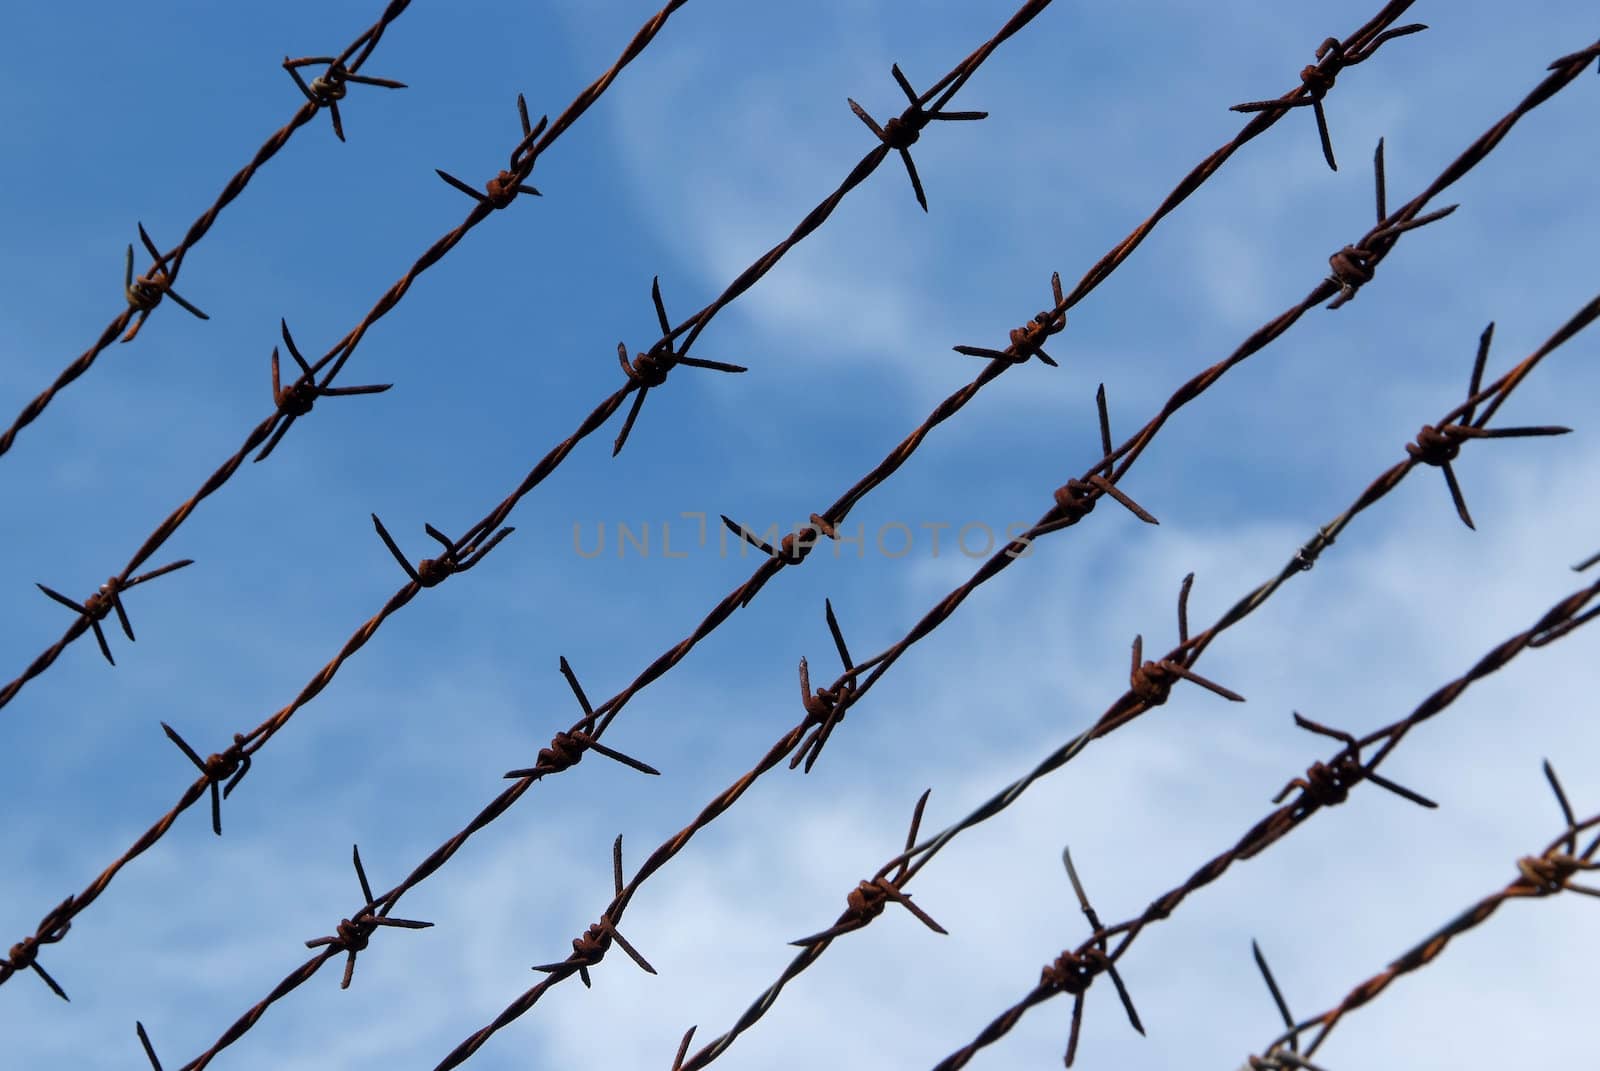 Barb wire fence and blue sky  by opasstudio